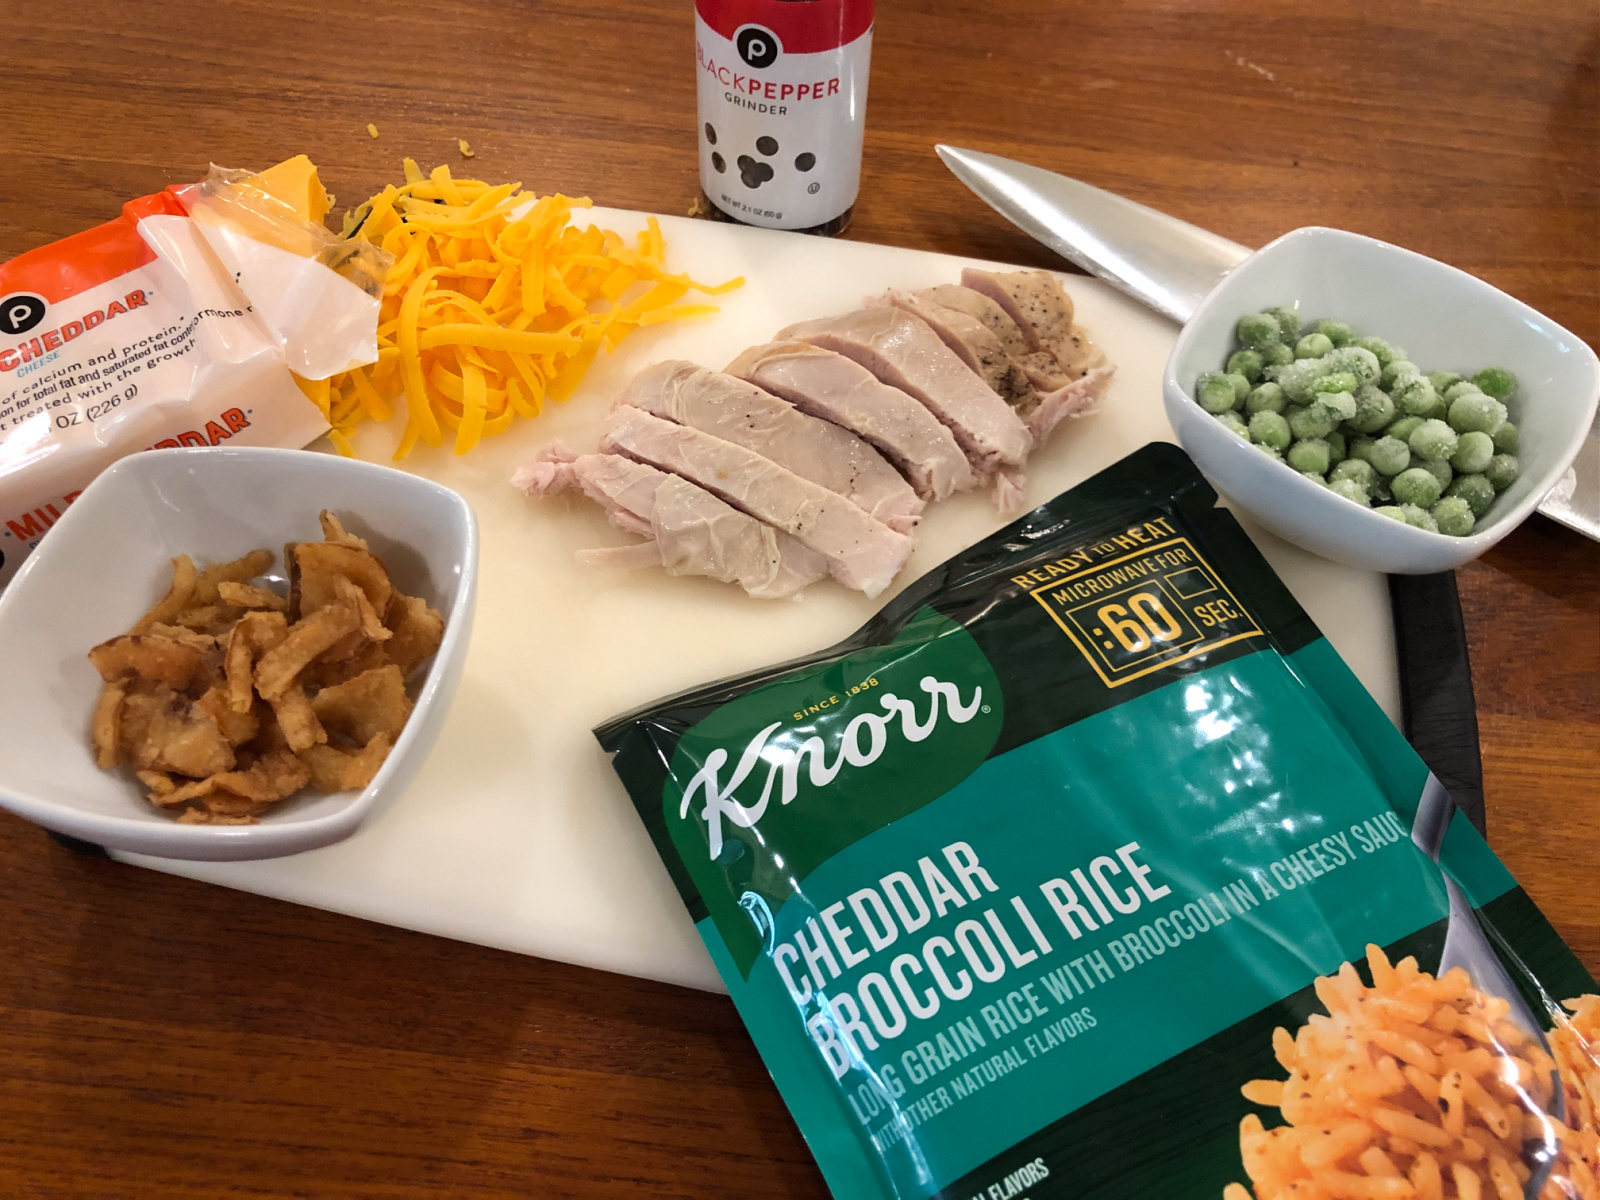 Thanksgiving Leftovers Rice Bowl - Clip Your Coupon And Save On Knorr Products At Publix on I Heart Publix